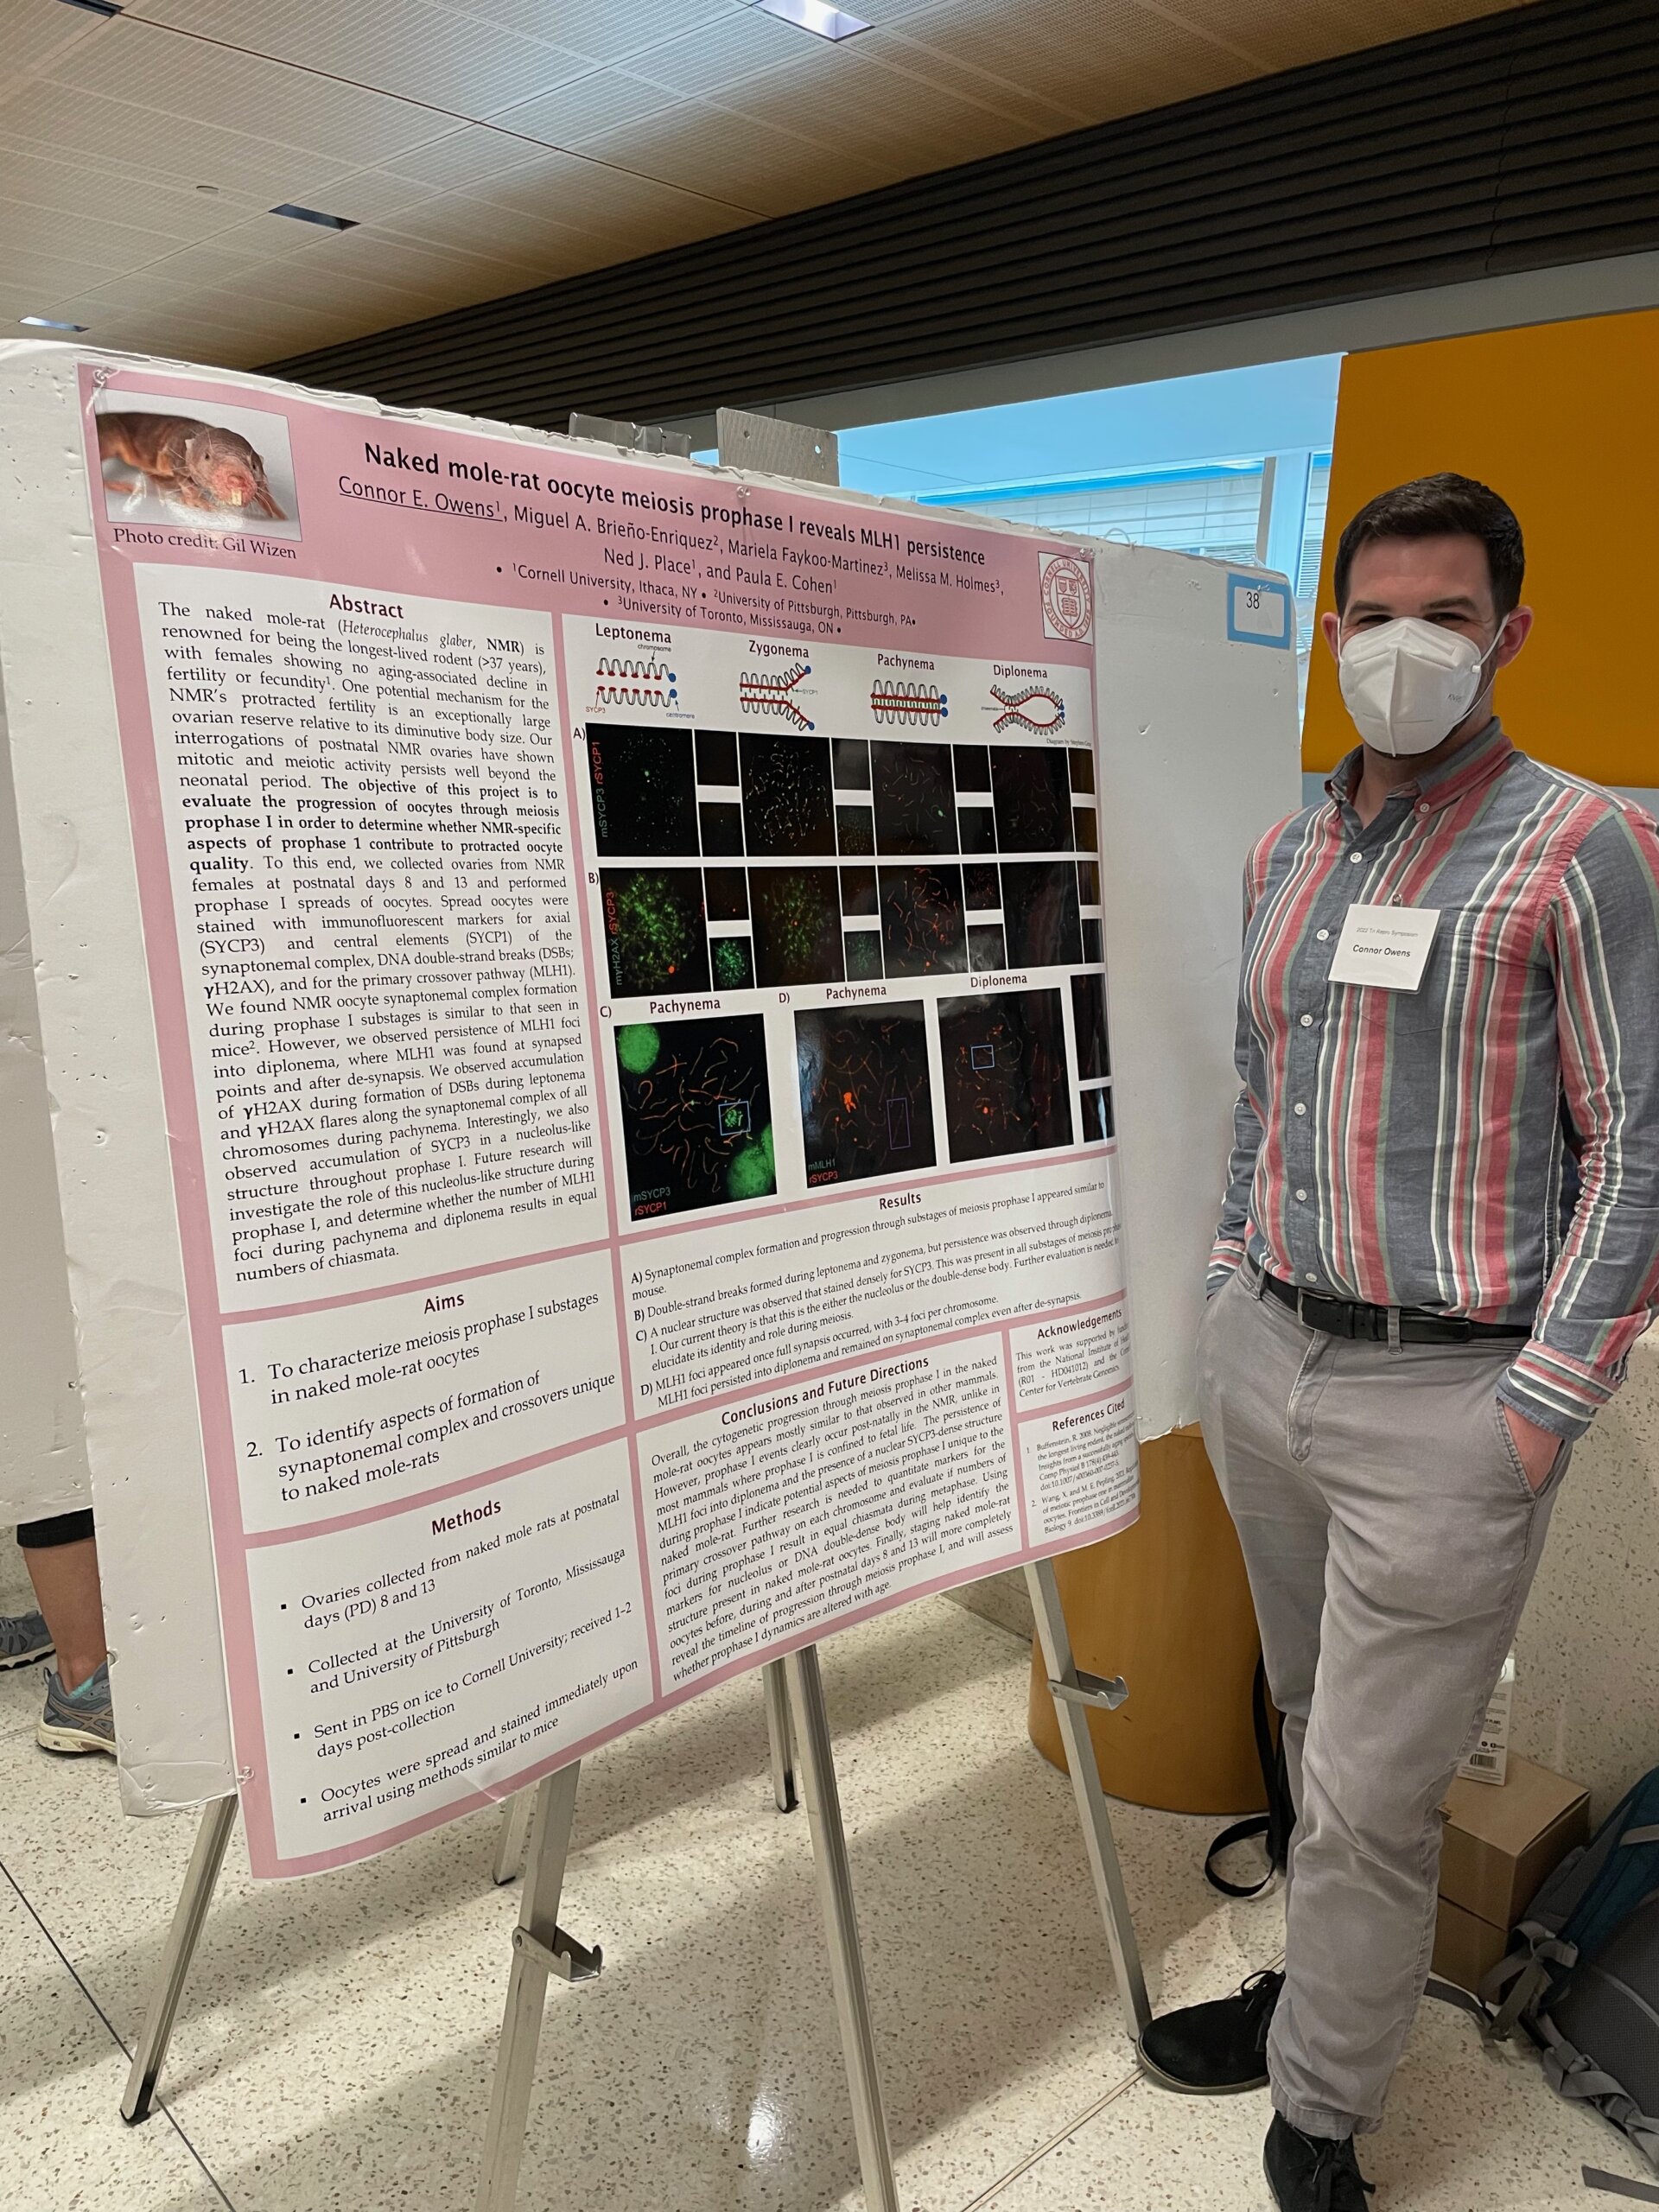 Dr Connor Owens posing in front of “Naked mole-rat oocyte meiosis prophase I reveals MLH1 persistence” poster display